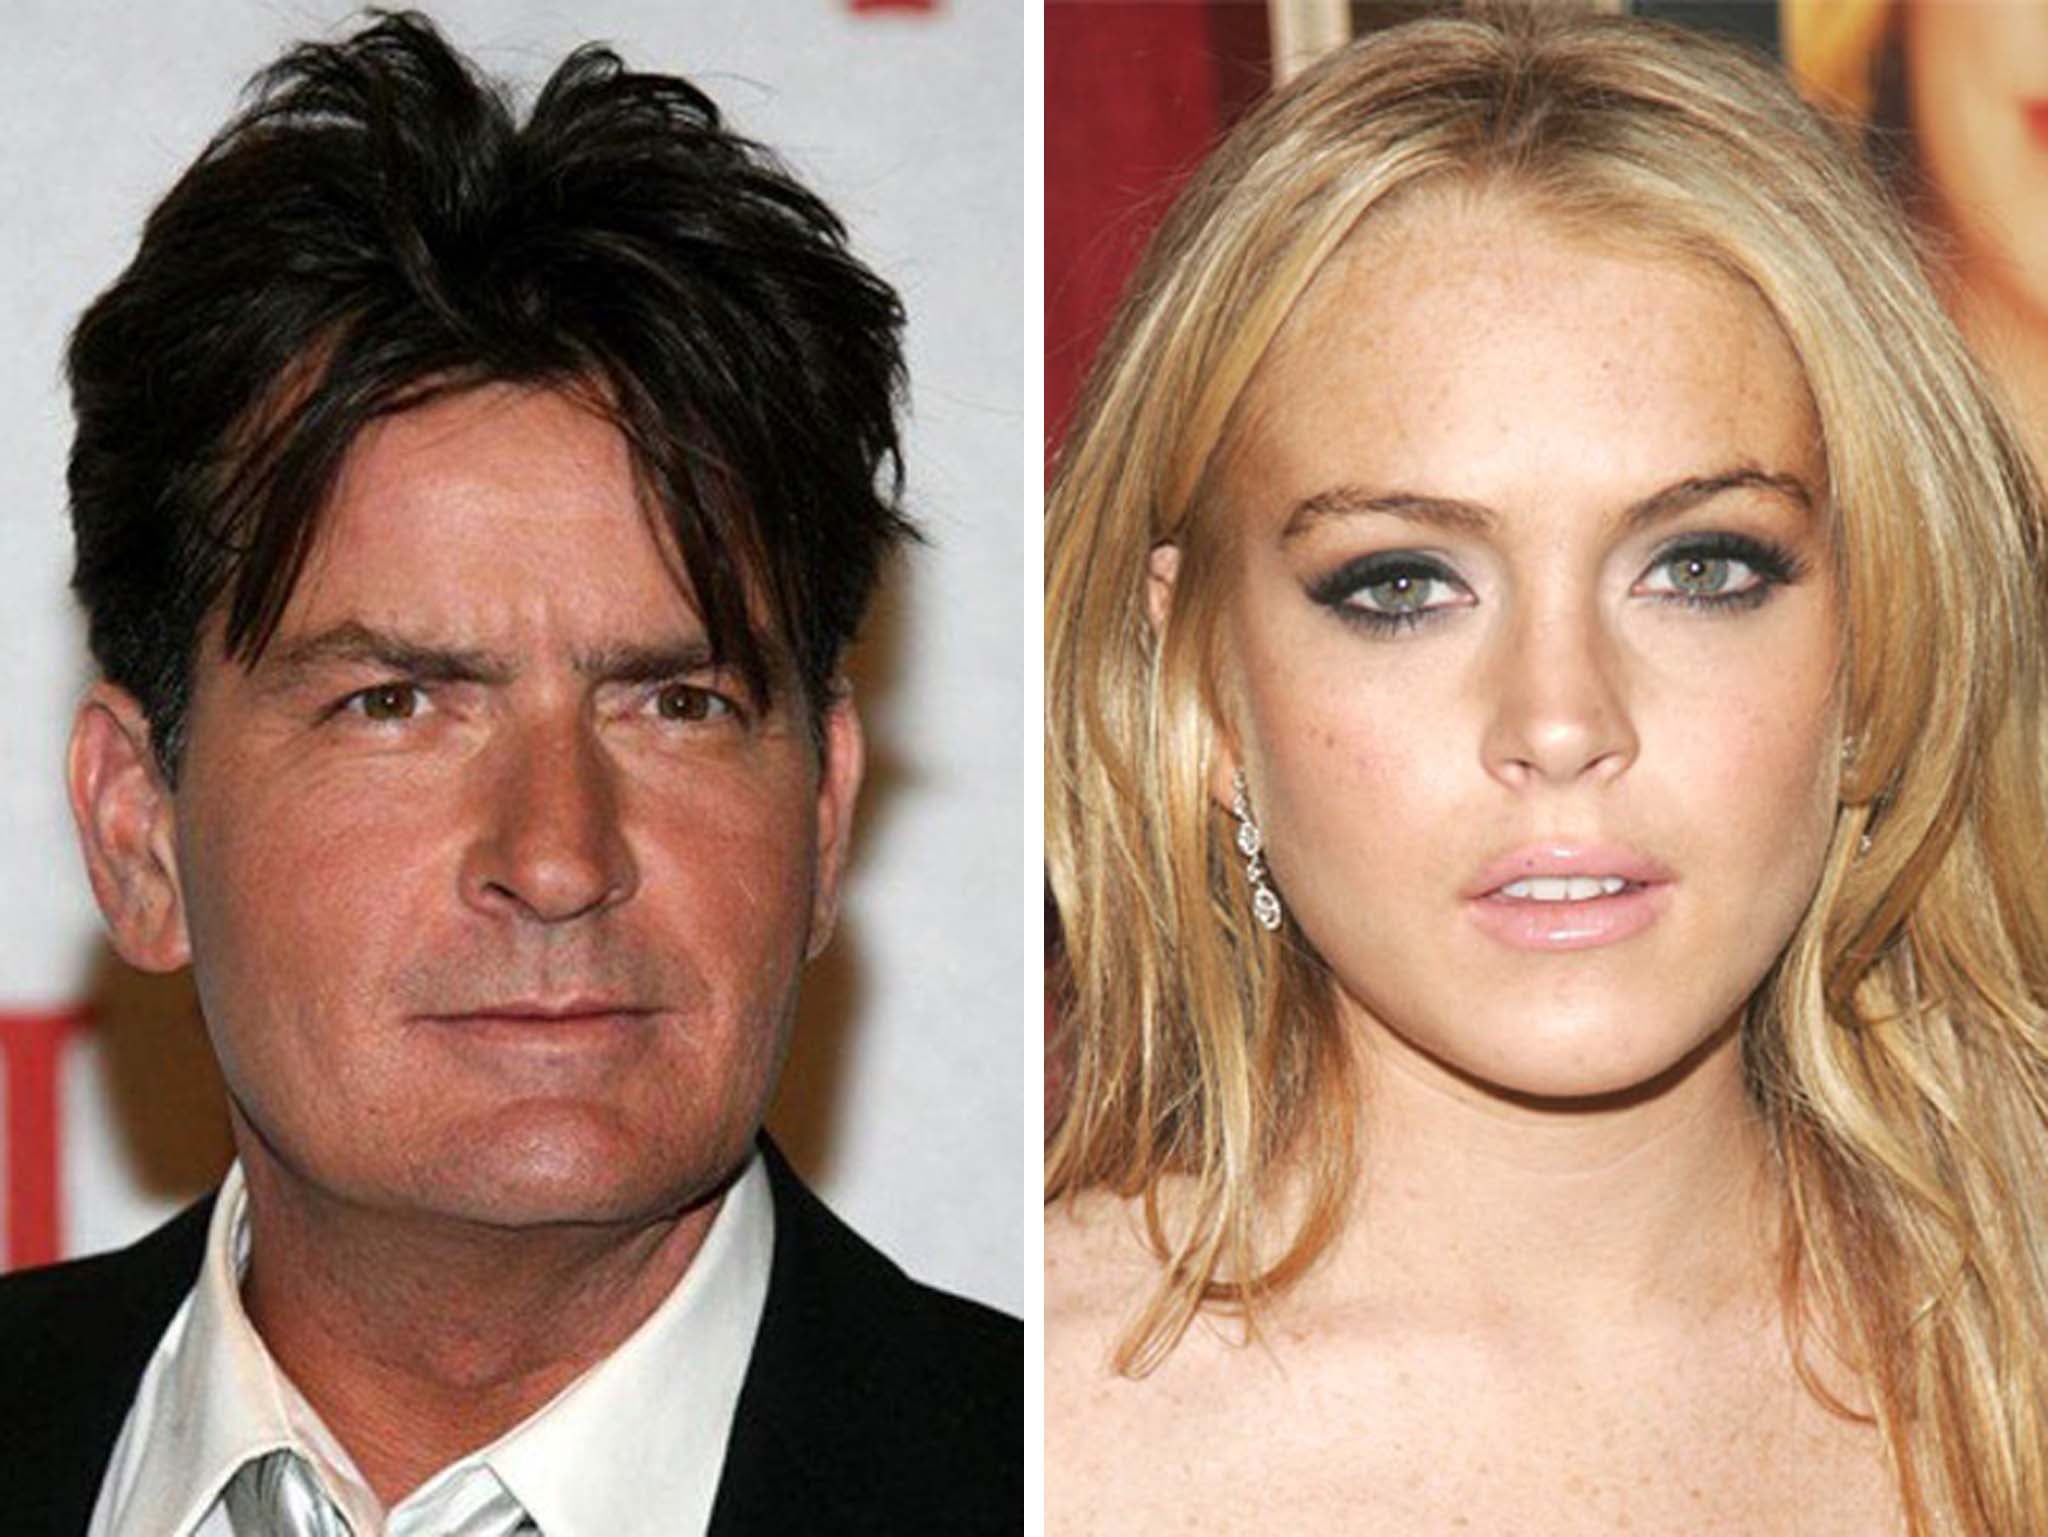 Lindsay Lohan is due to appear on Charlie Sheen's show Anger Management